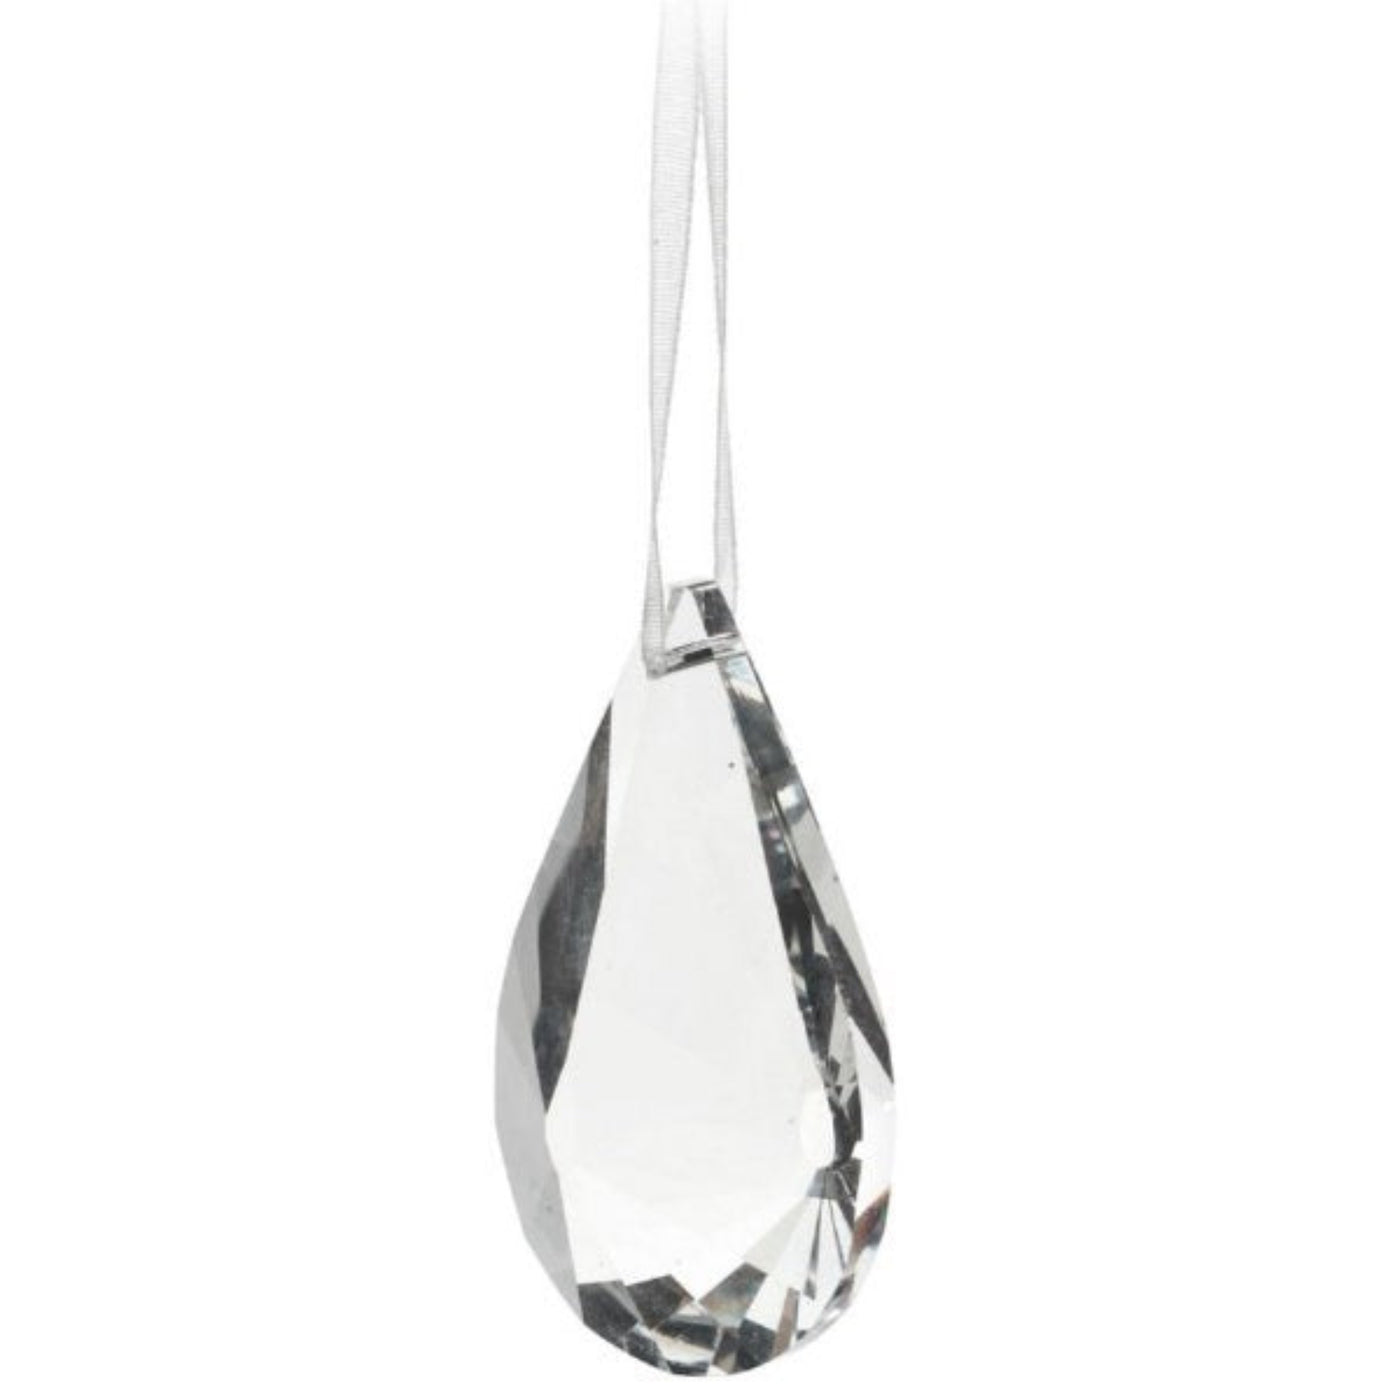 Crystal Drop Ornament - Christmas decor for your tree and stockings.